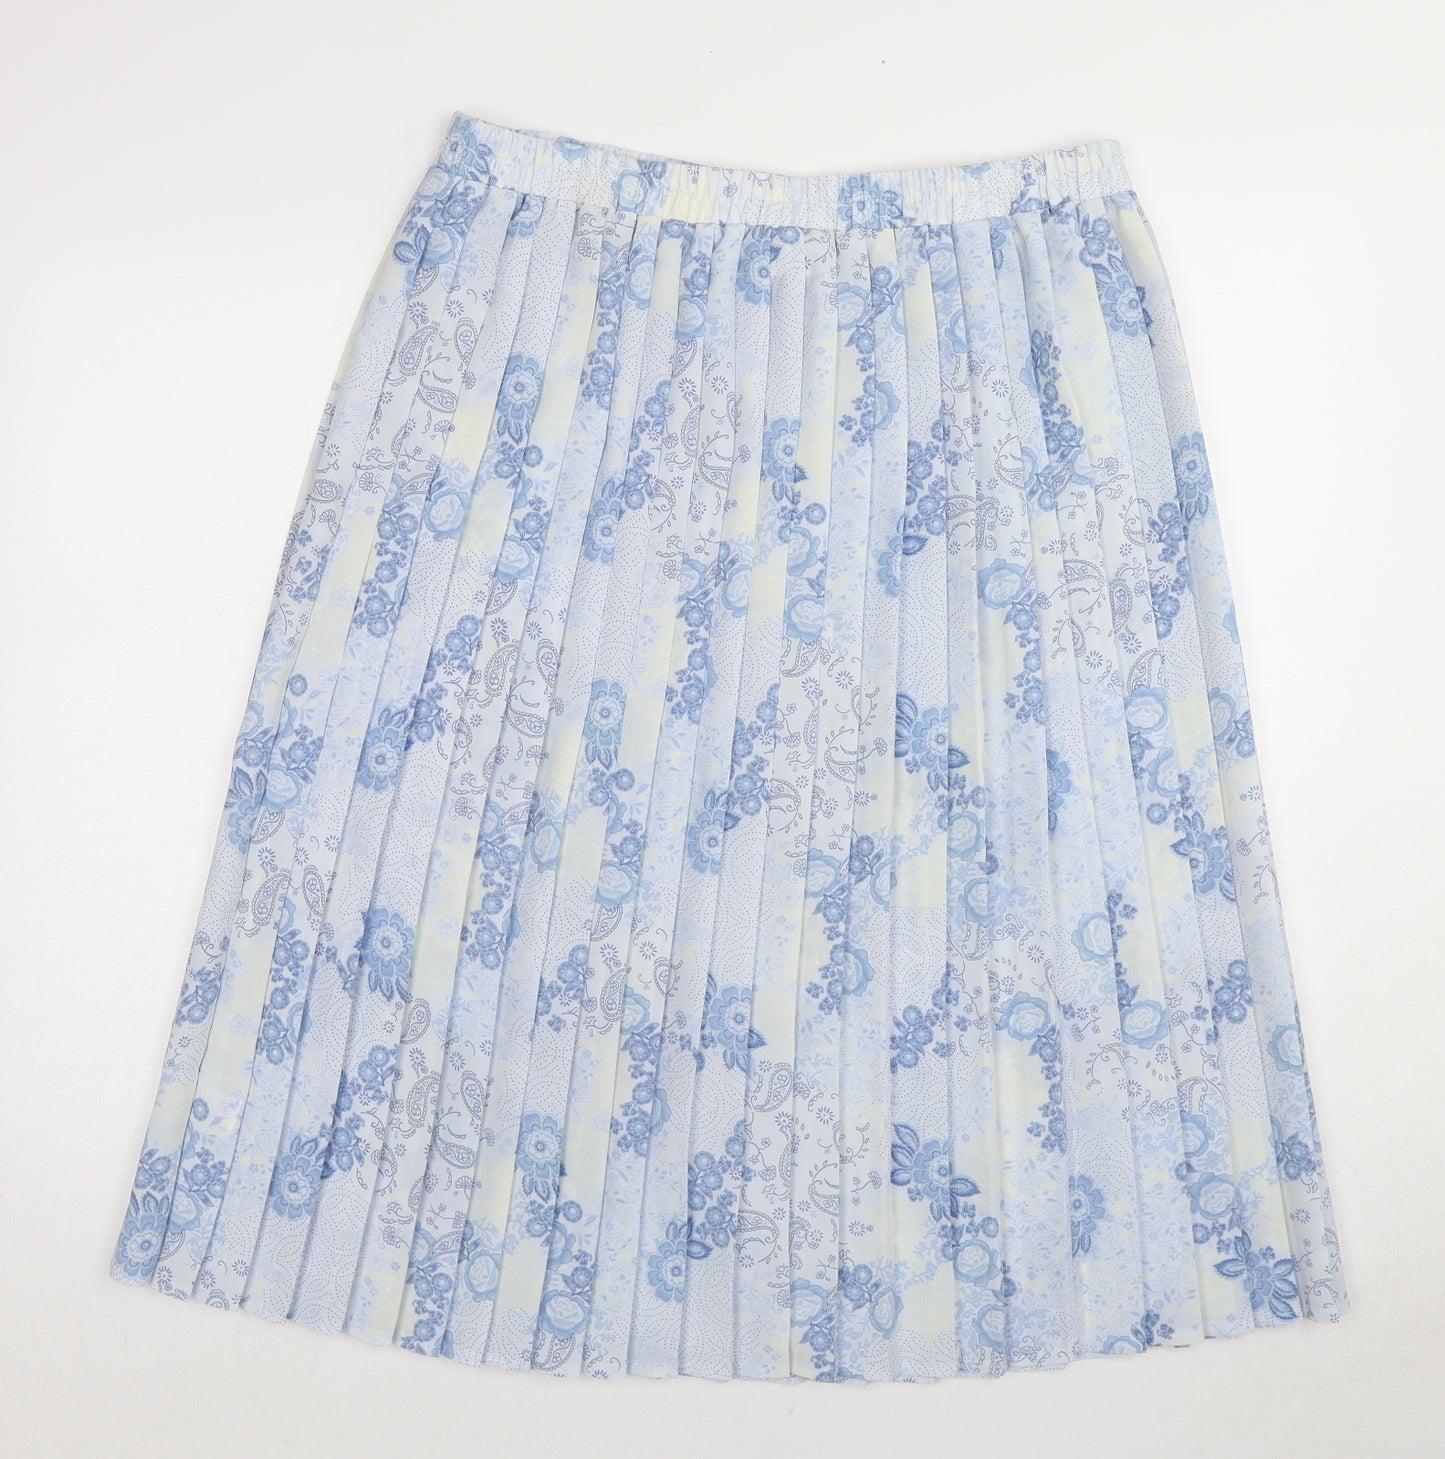 Bonmarché Womens Blue Geometric Polyester Pleated Skirt Size 16